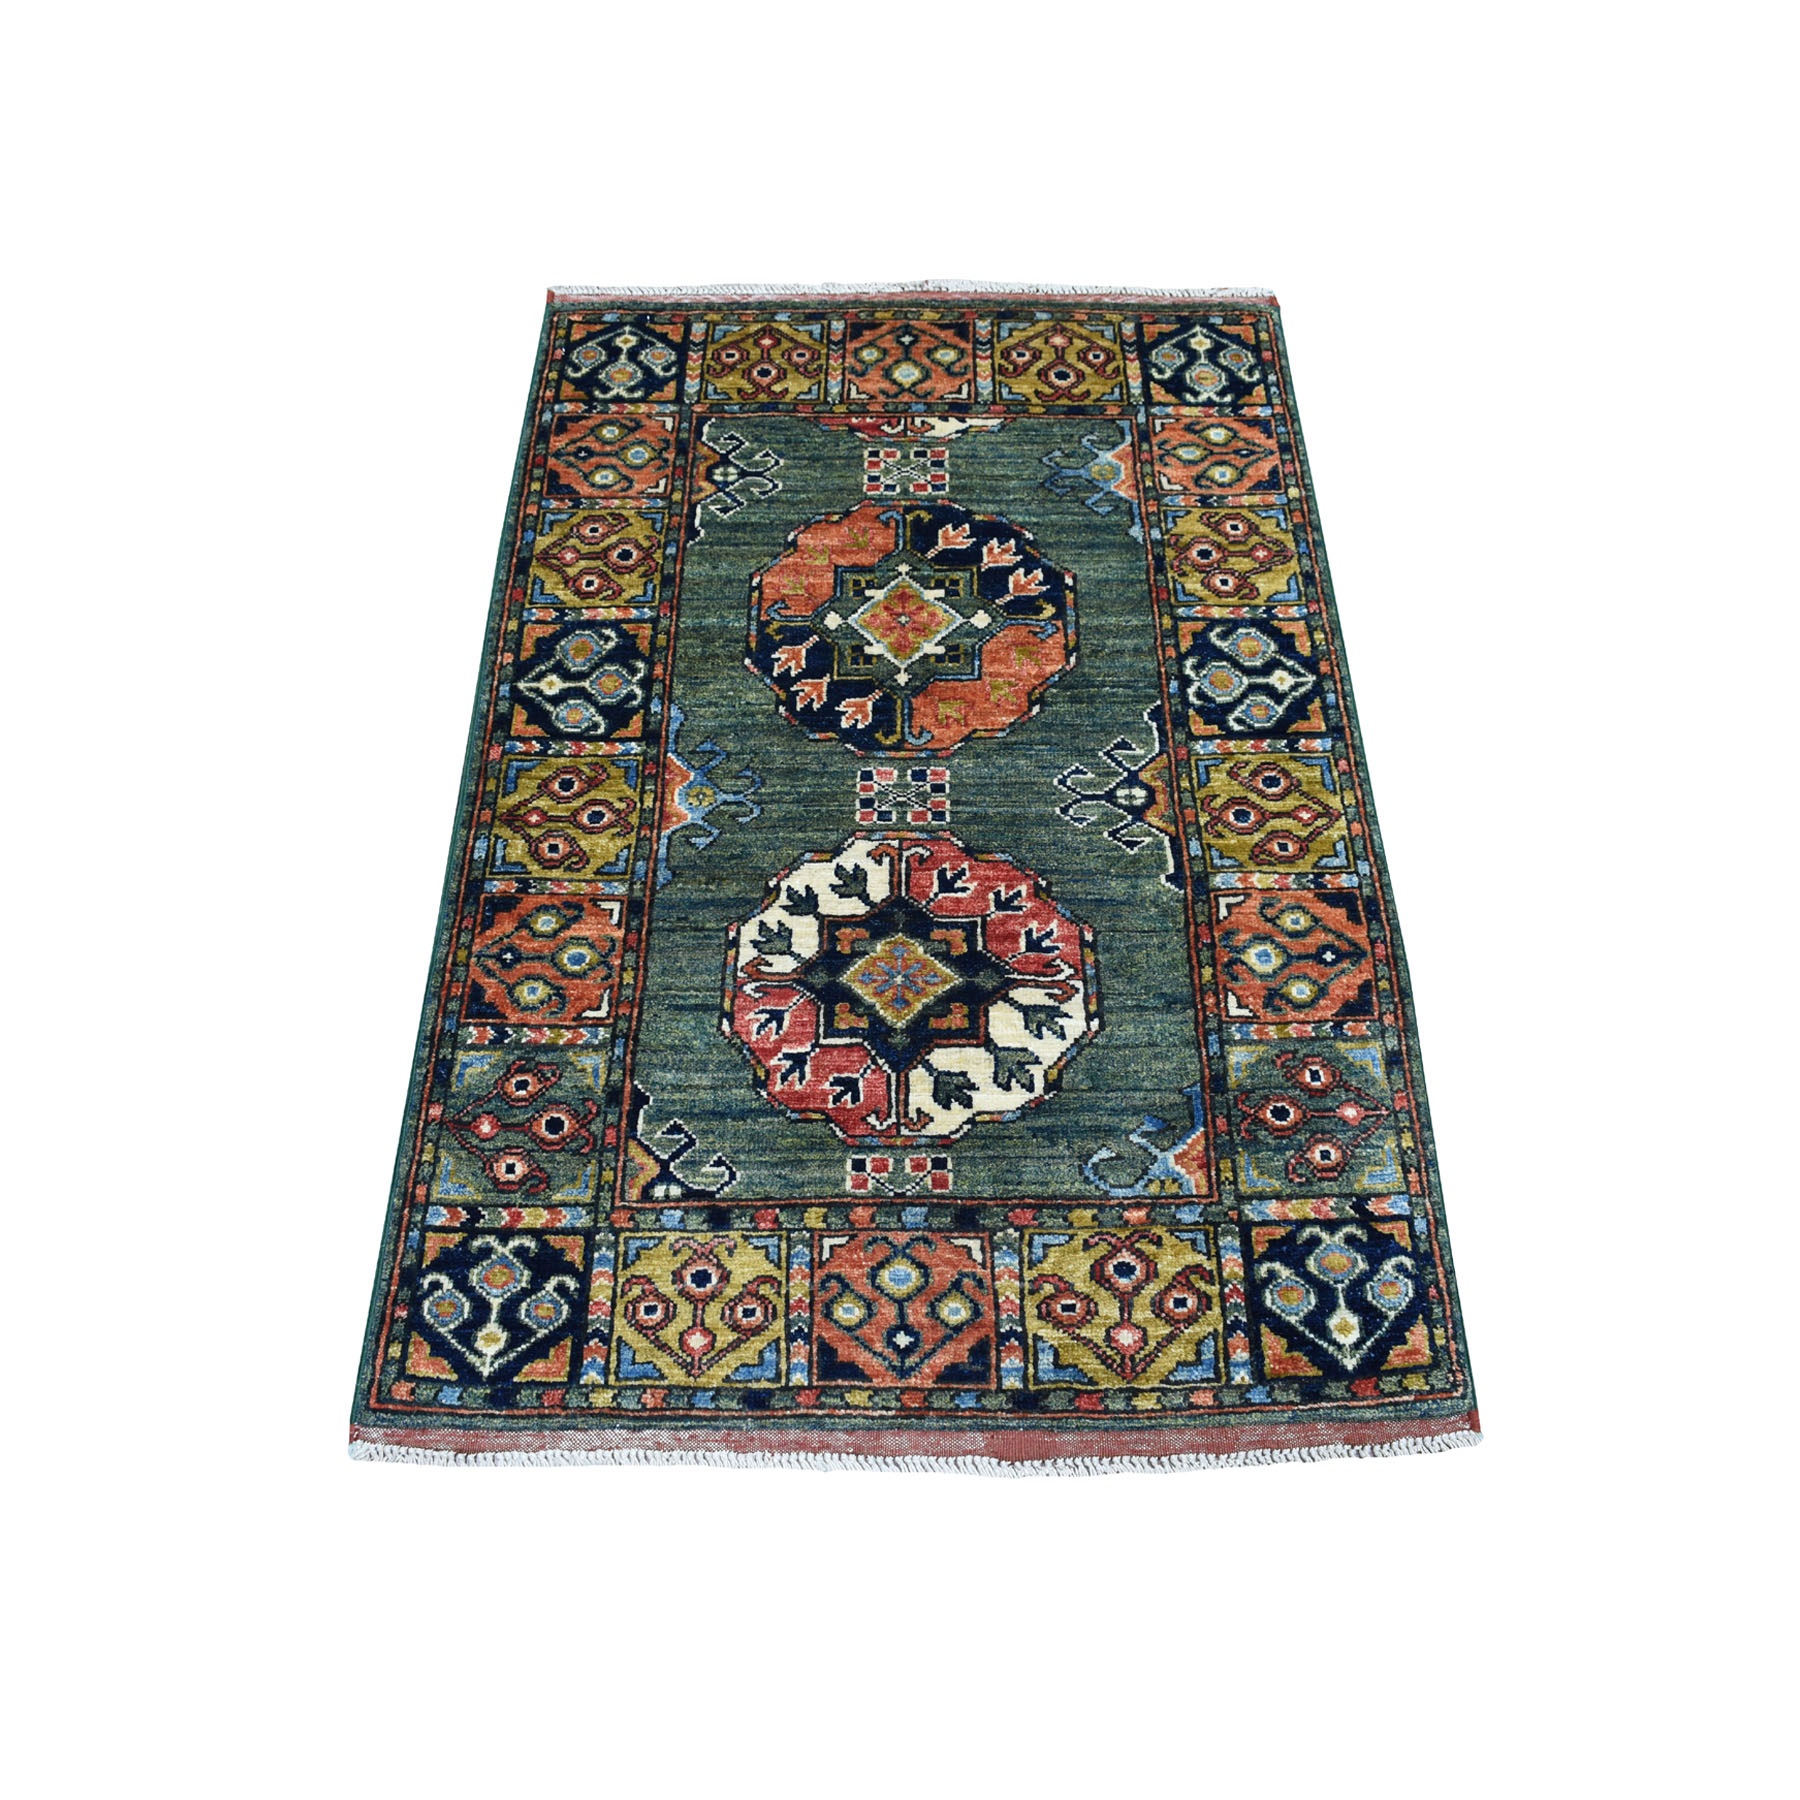 2'8"X4' Afghan Ersari Natural Dyes Elephant Feet Design Pure Wool Hand Knotted Oriental Rug moaec09e